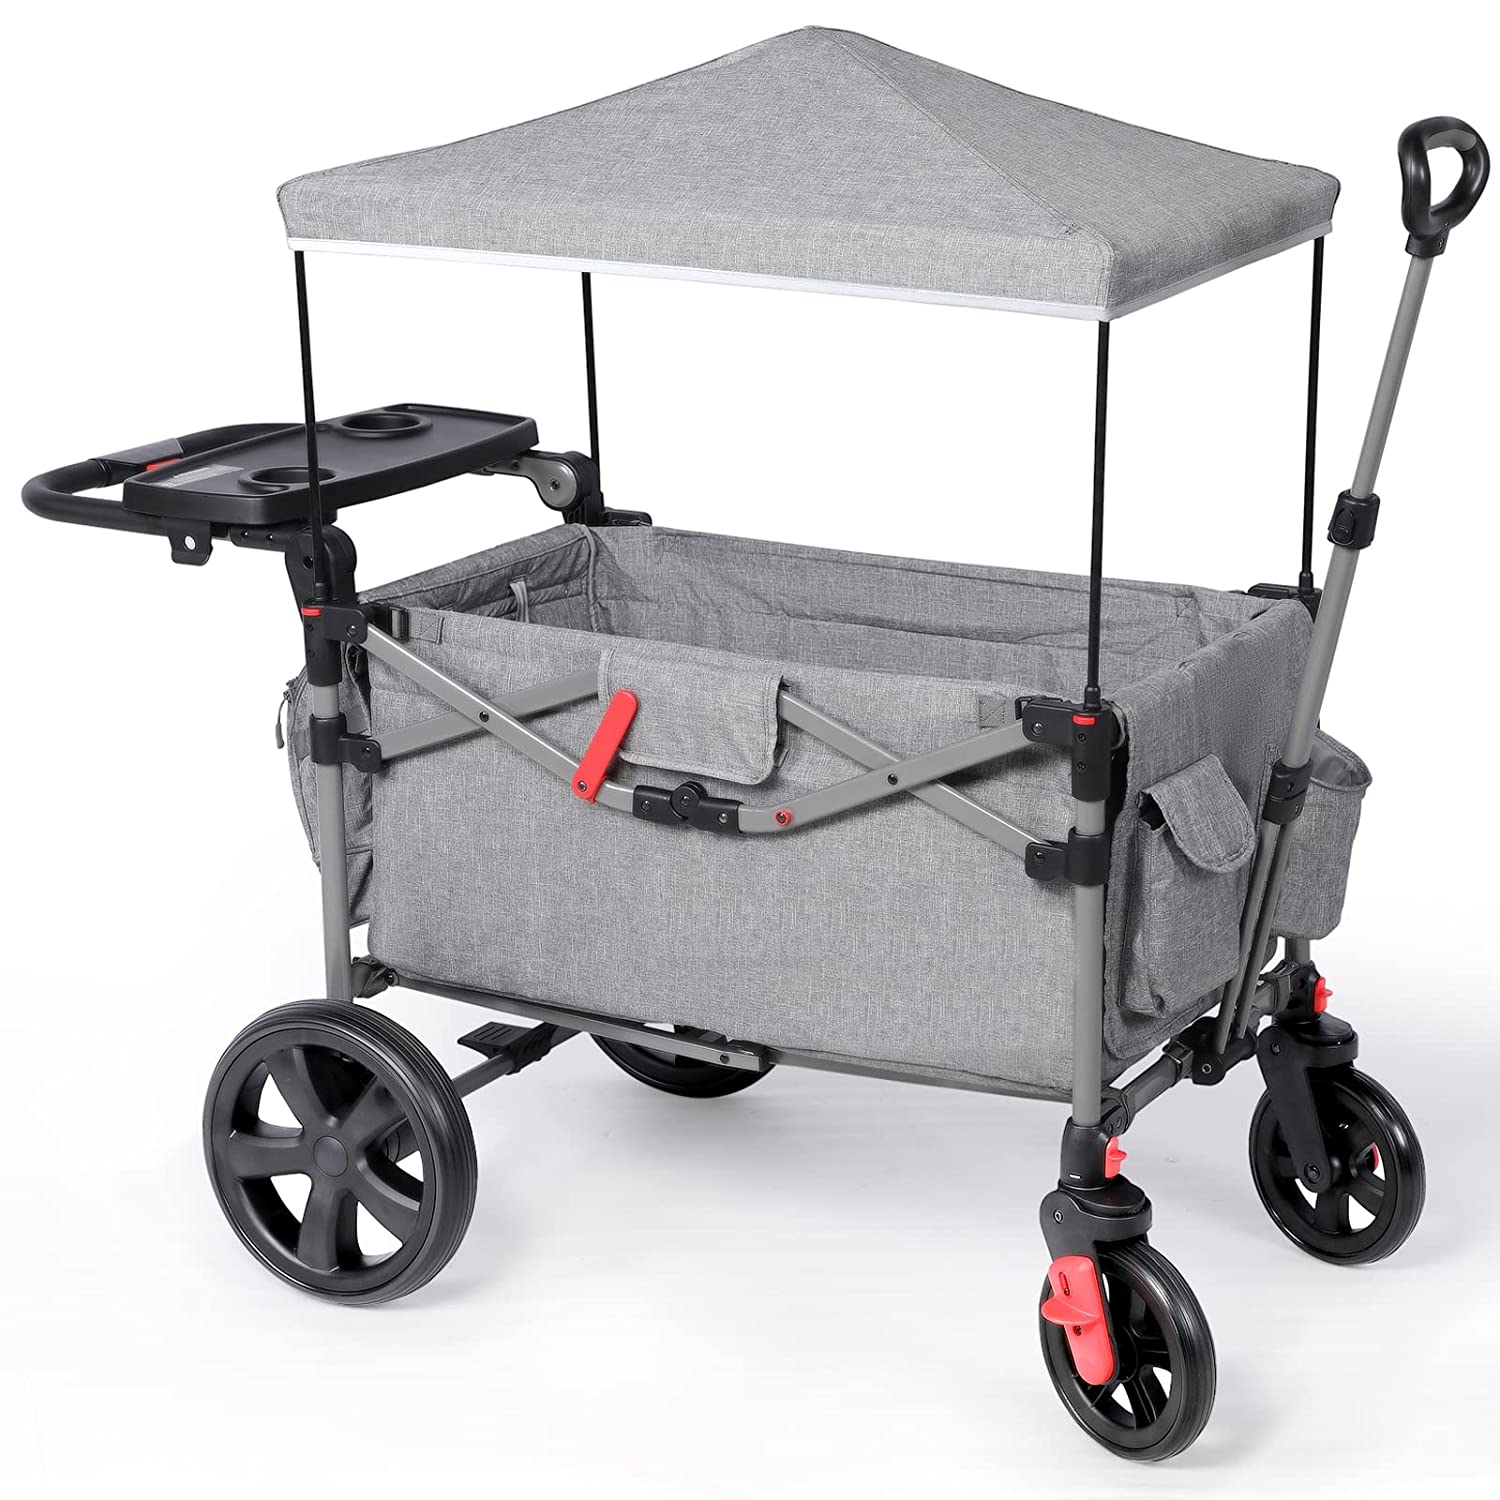 Review of EVER ADVANCED Foldable Wagons for Two Kids & Cargo